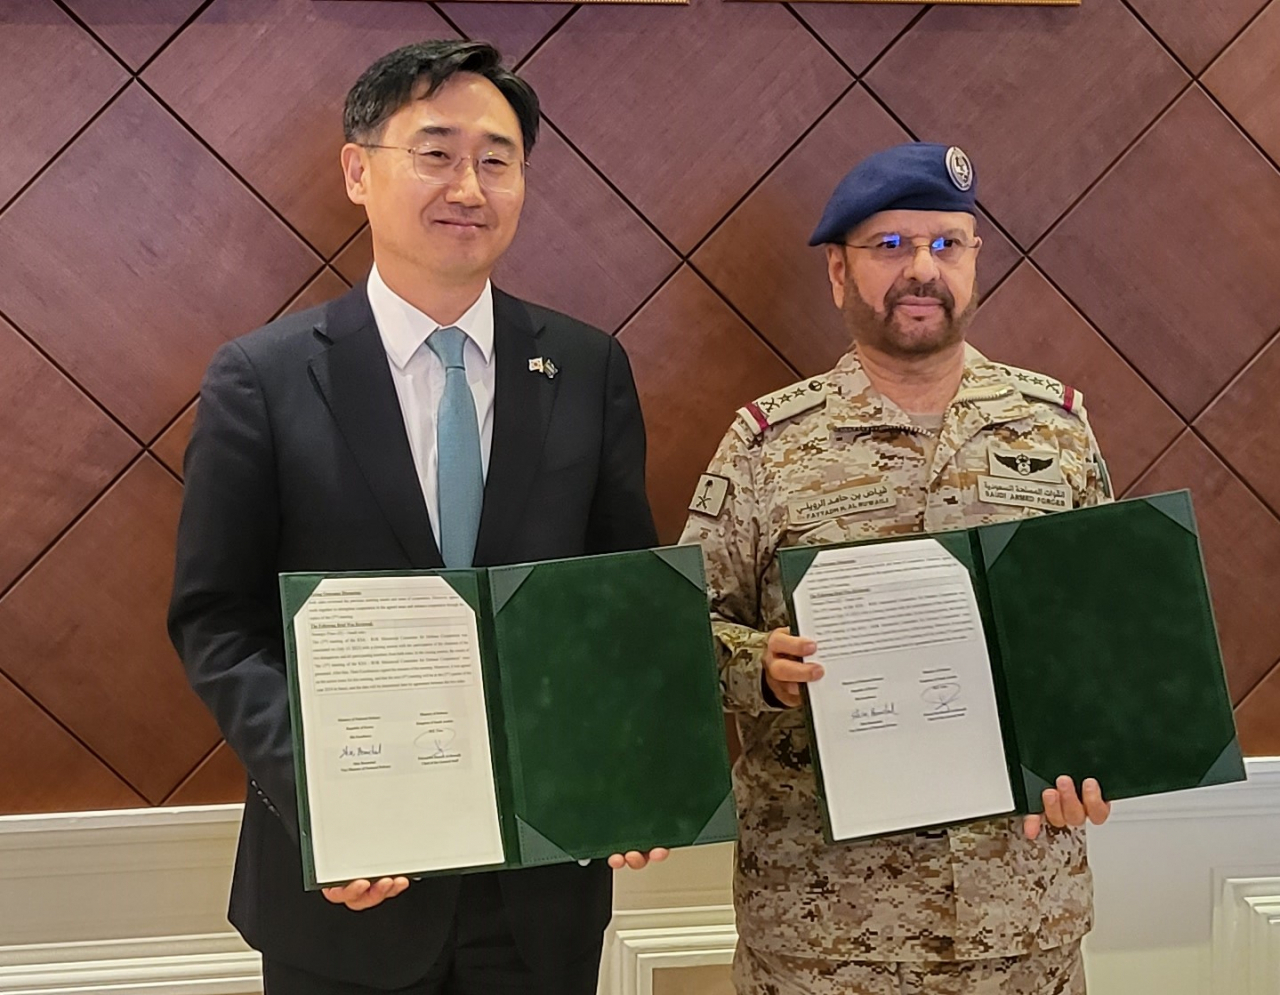 Vice Defense Minister Shin Beom-chul (left) and Fayyadh bin Hamed Al-Ruwaili, chairman of Saudi Arabia's General Staff, pose for a photo holding the minutes of their meeting in Riyadh on Monday. (Yonhap)